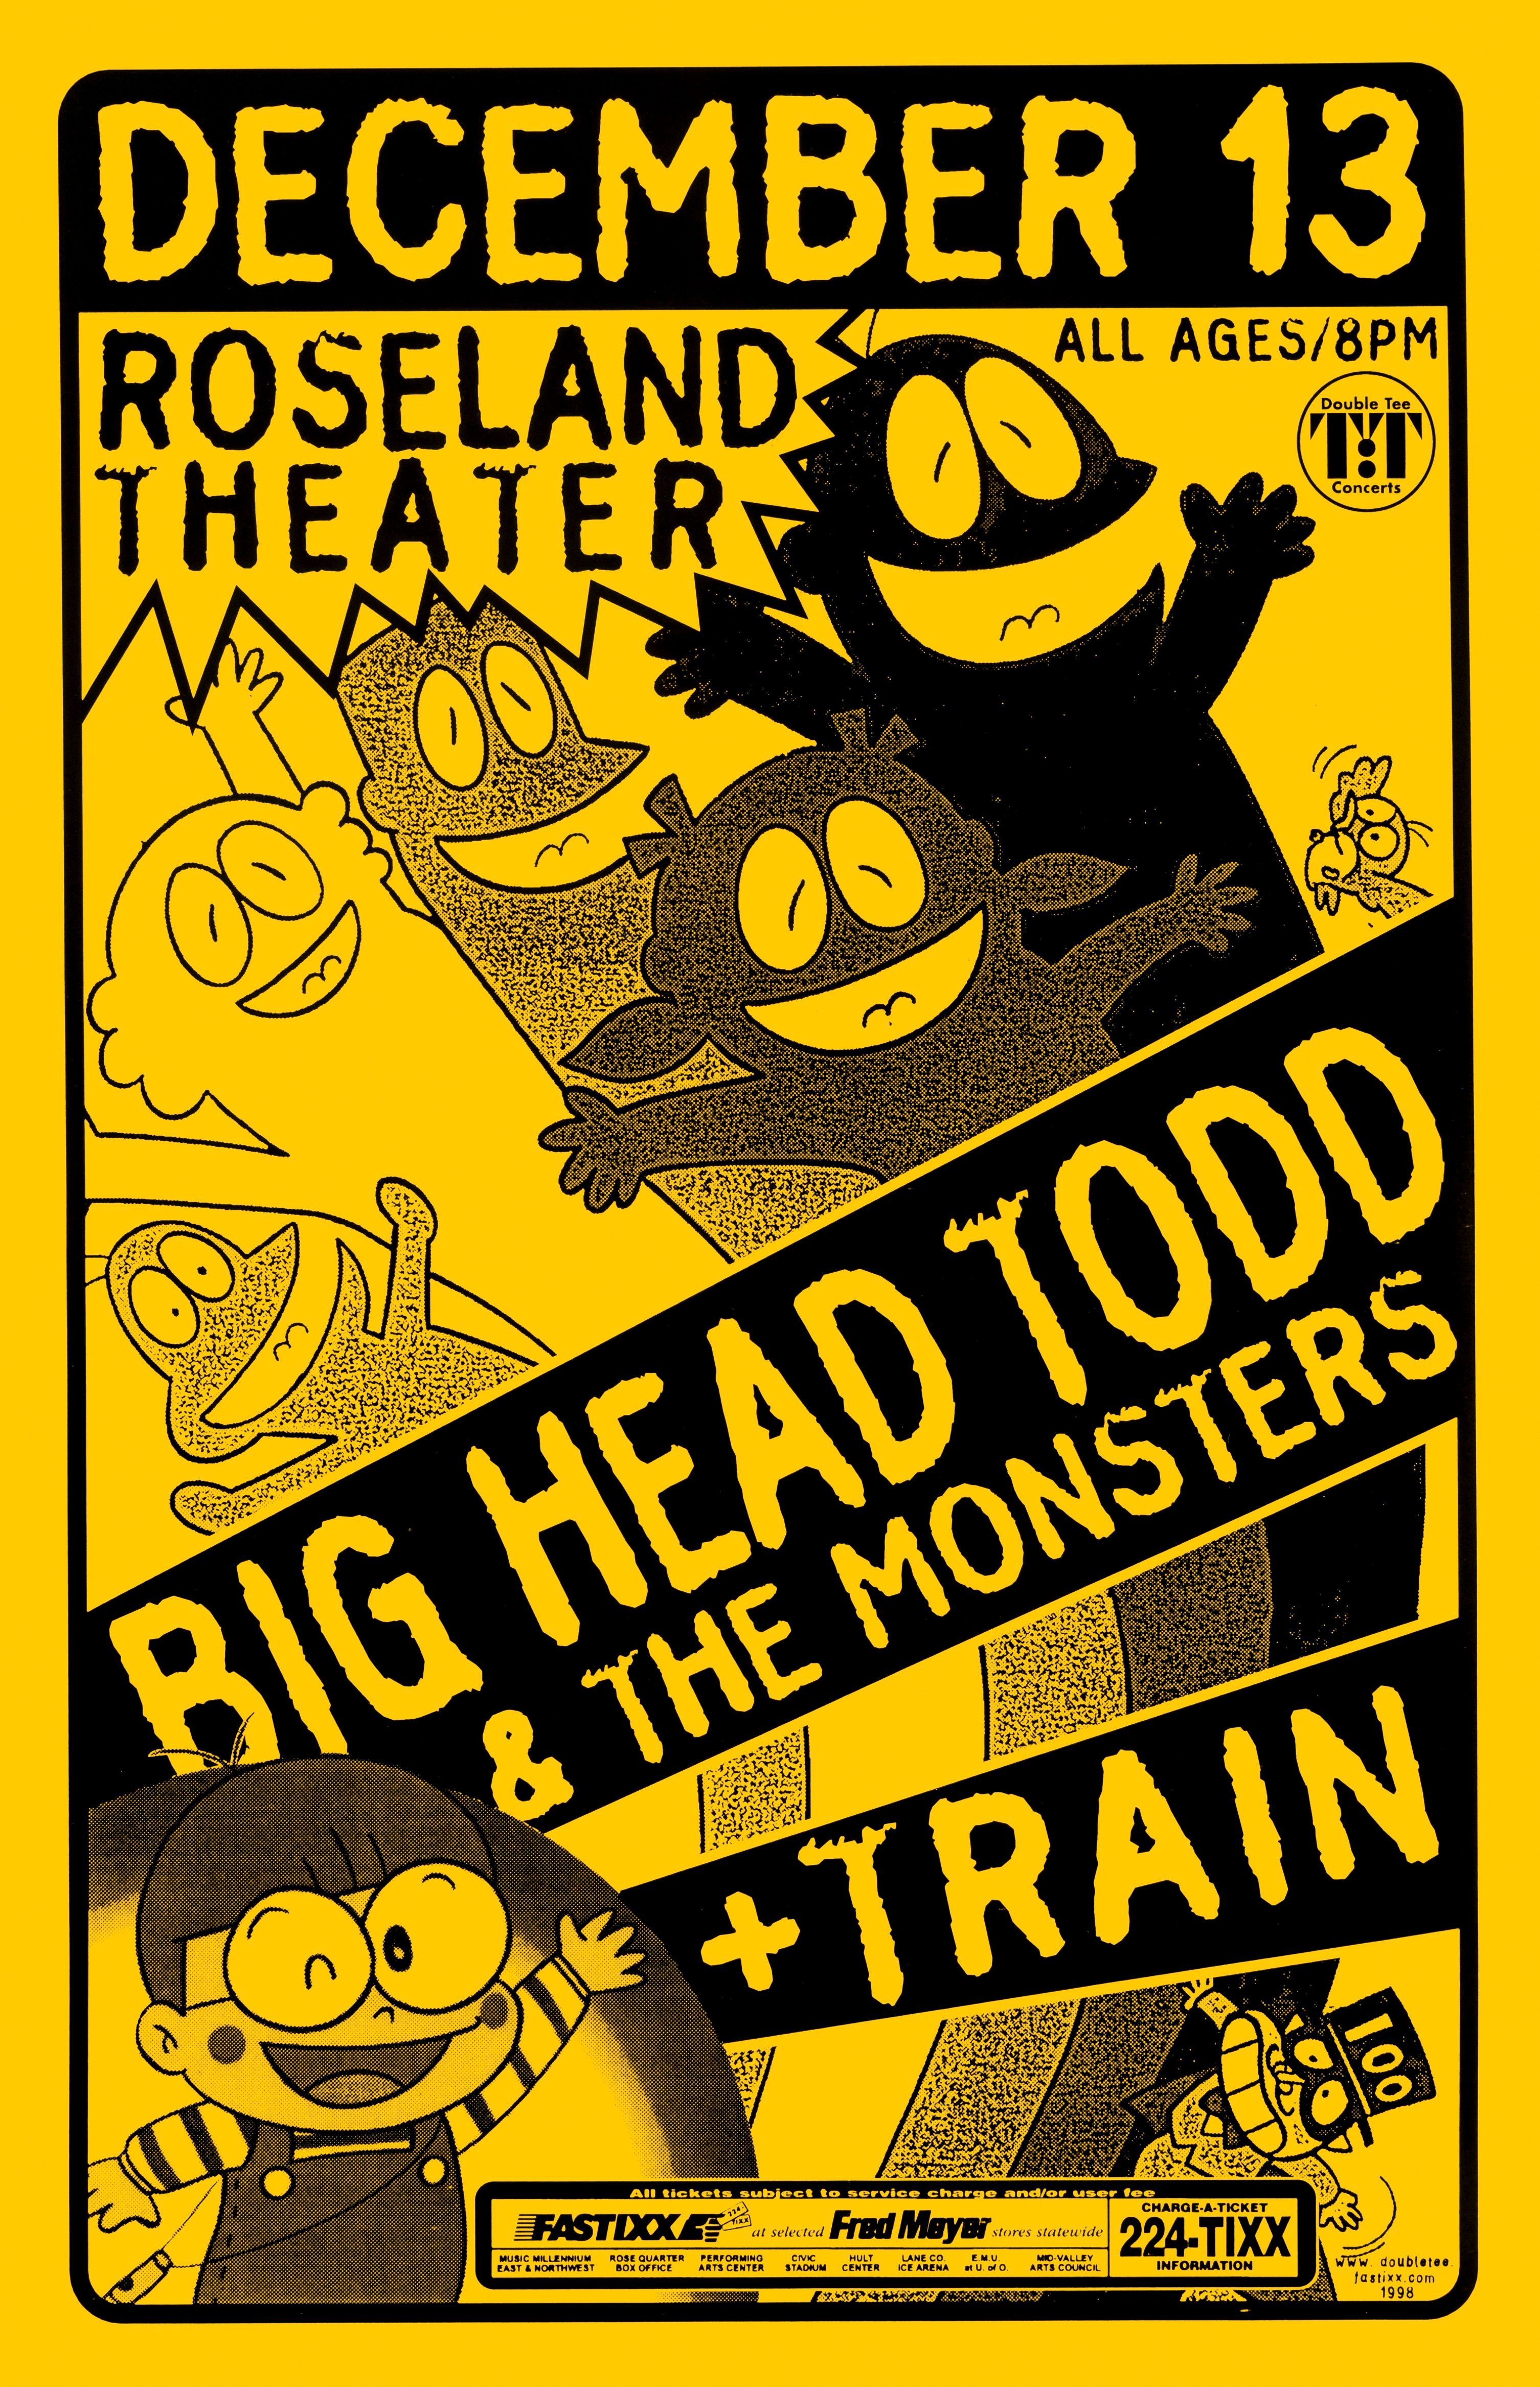 MXP-182.3 Big Head Todd & The Monsters 1998 Roseland Theater  Dec 13 Concert Poster